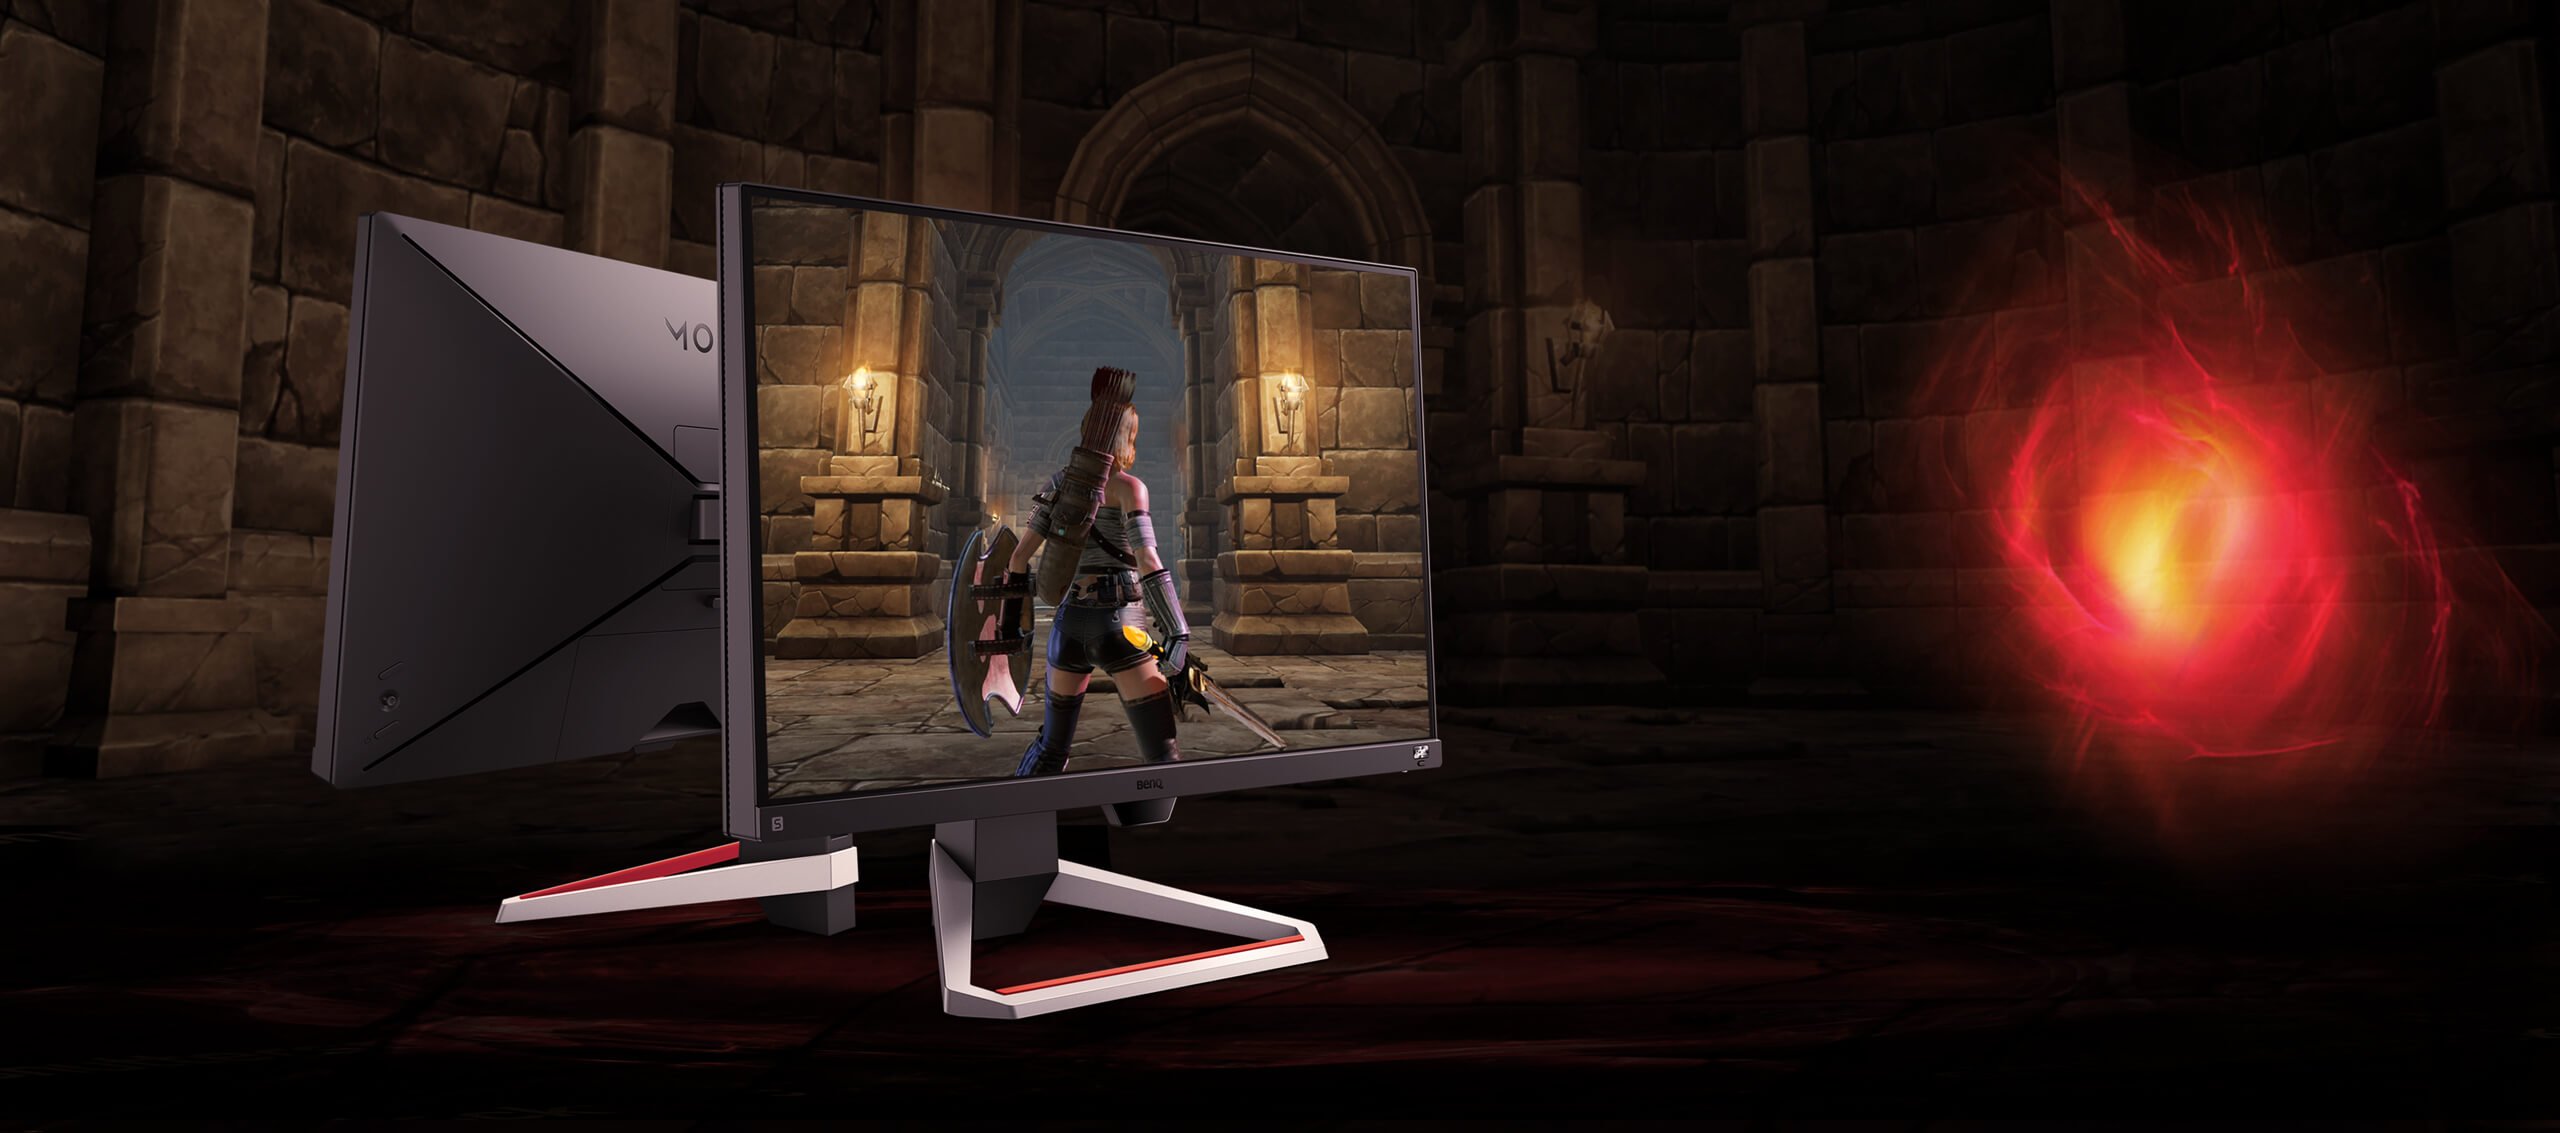 BenQ 165Hz gaming monitor EX2510S is engineered to enjoy better control and greater efficiency in the palm of your hand